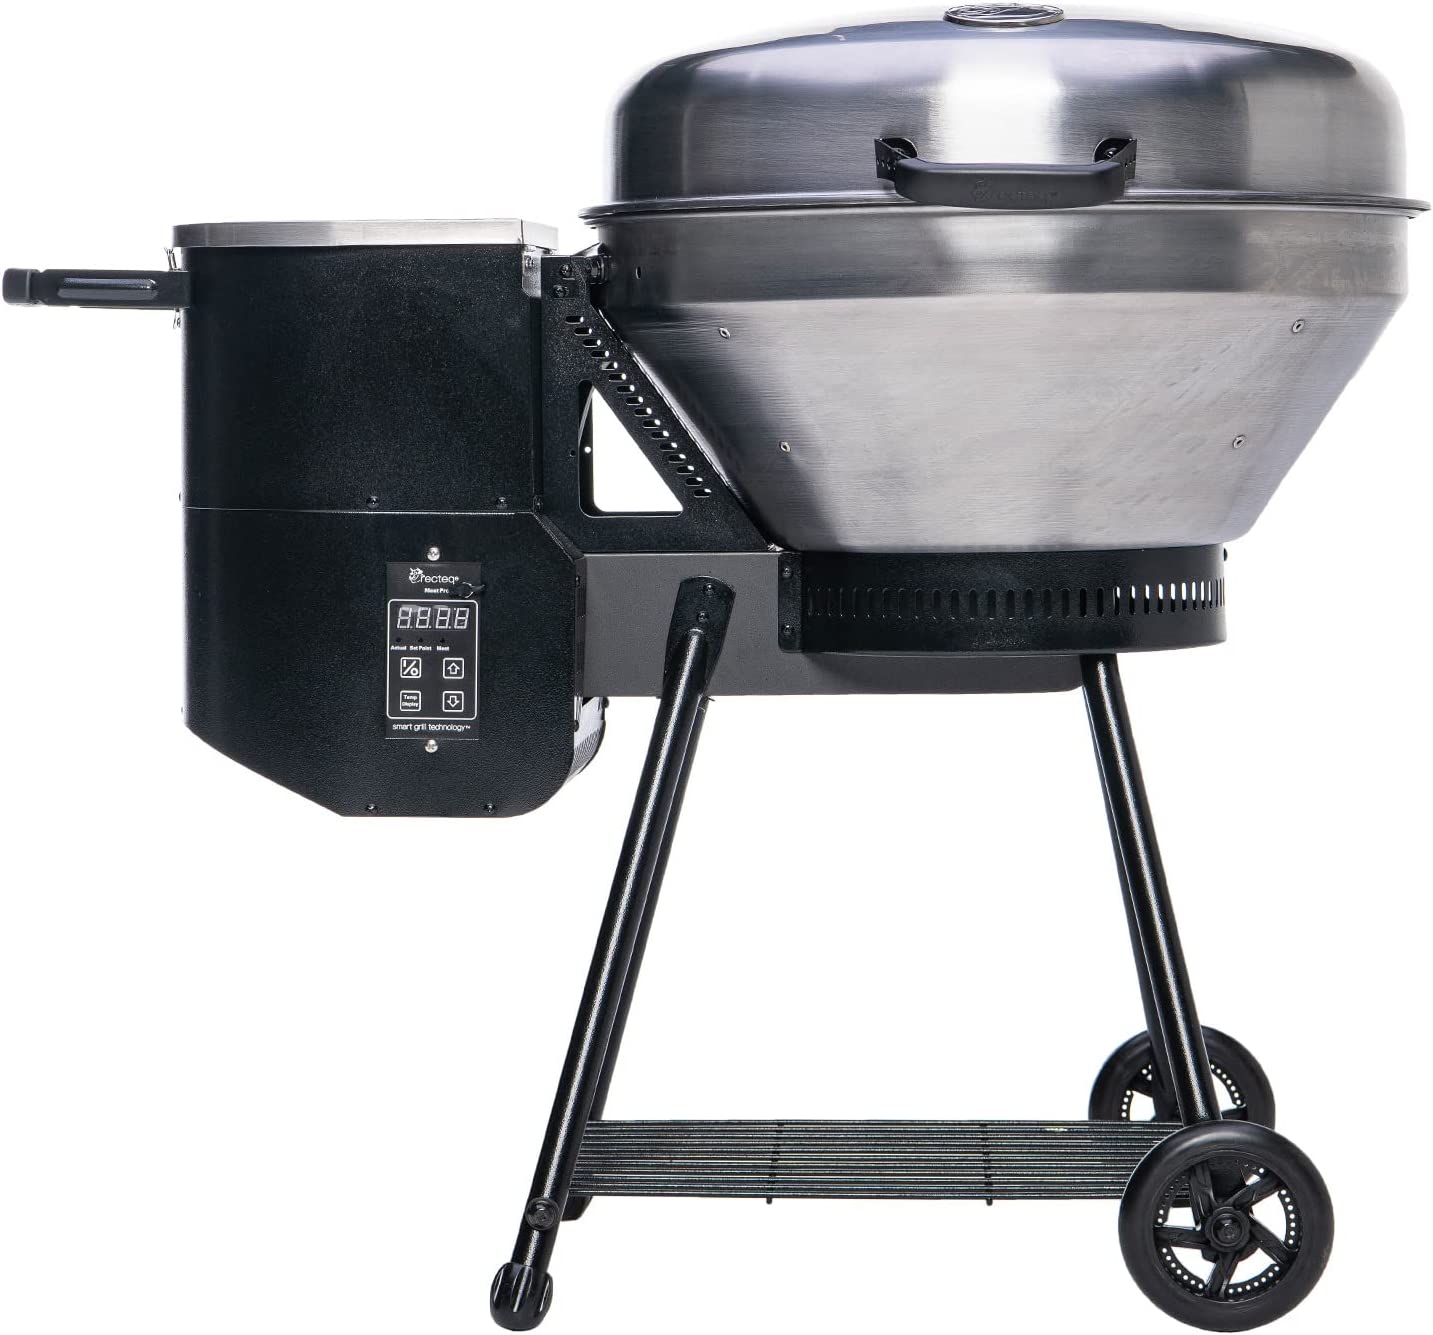 Up Your Game in a Backyard BBQ with the Best Pellet Grill